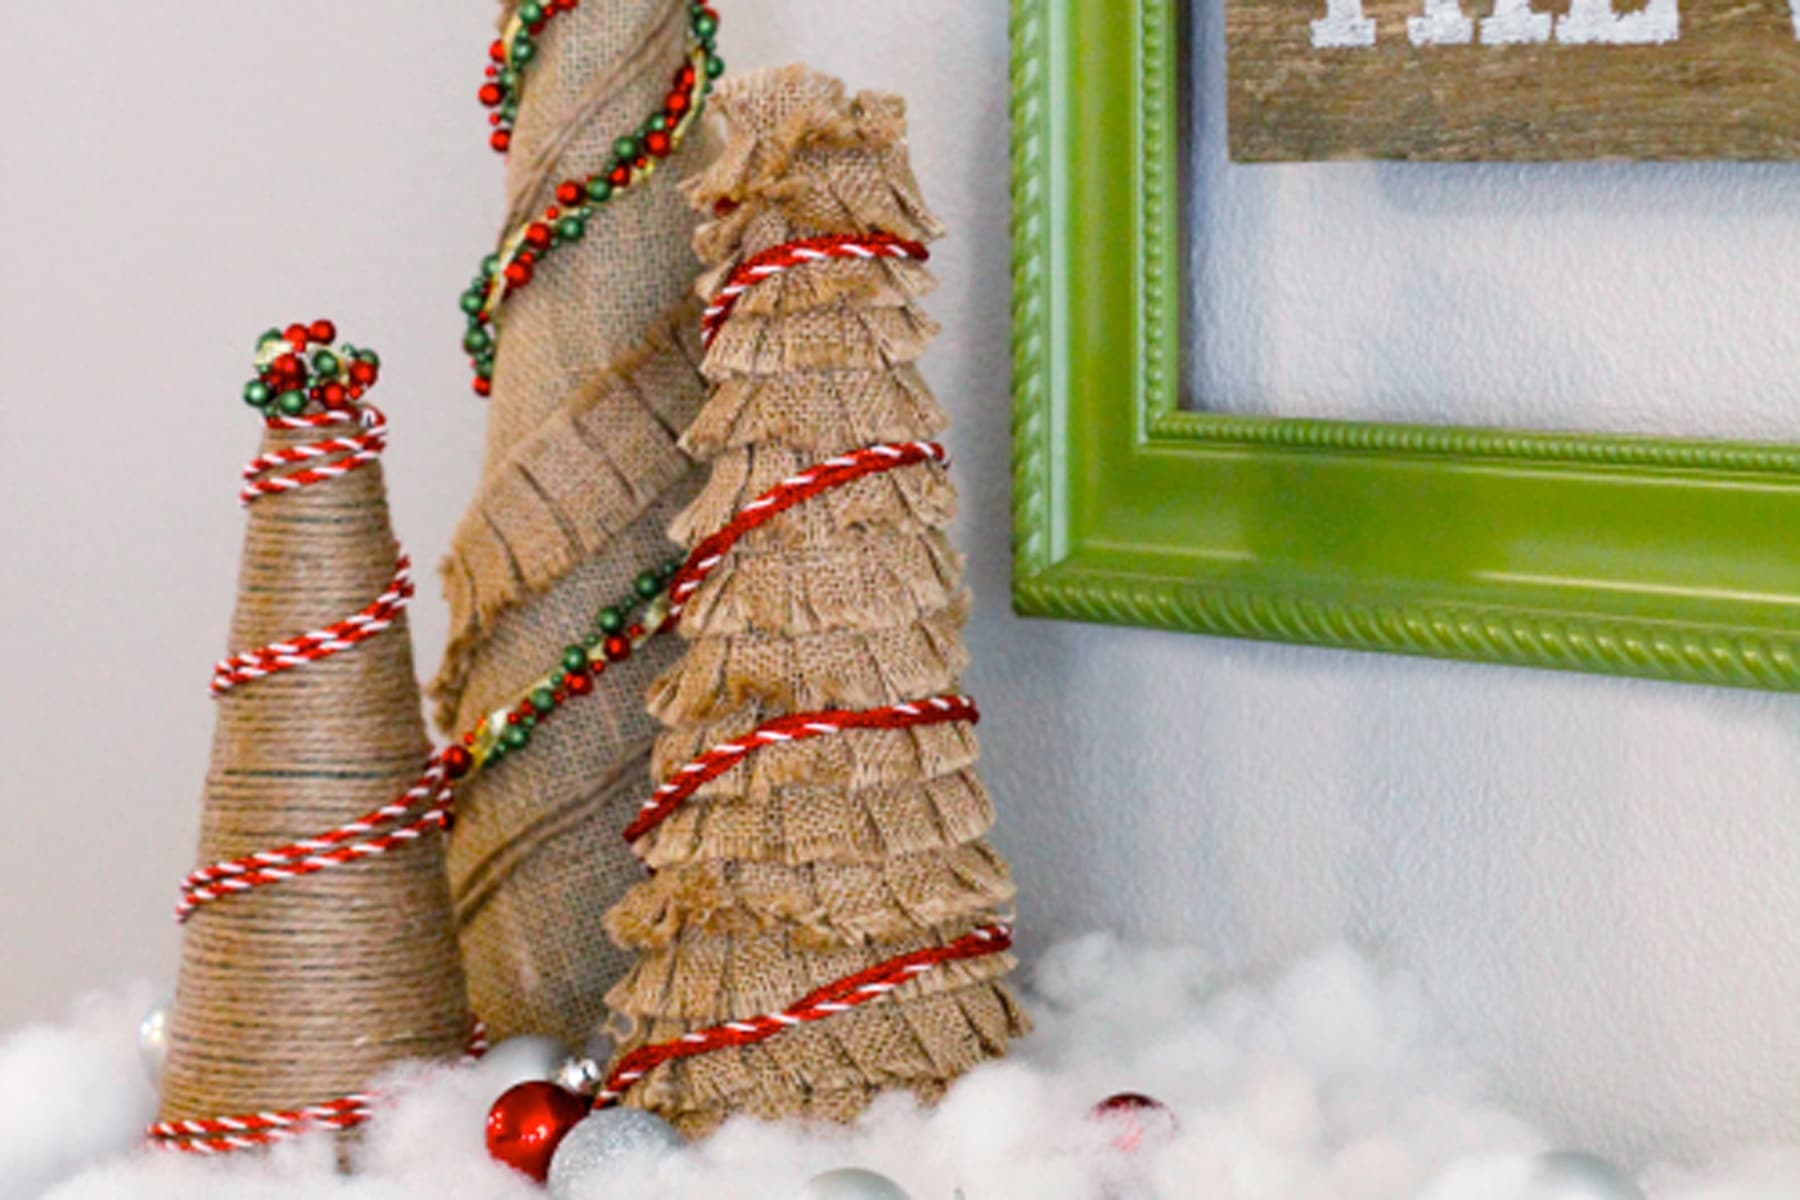 Mini burlap christmas trees with red trim against a green frame image.